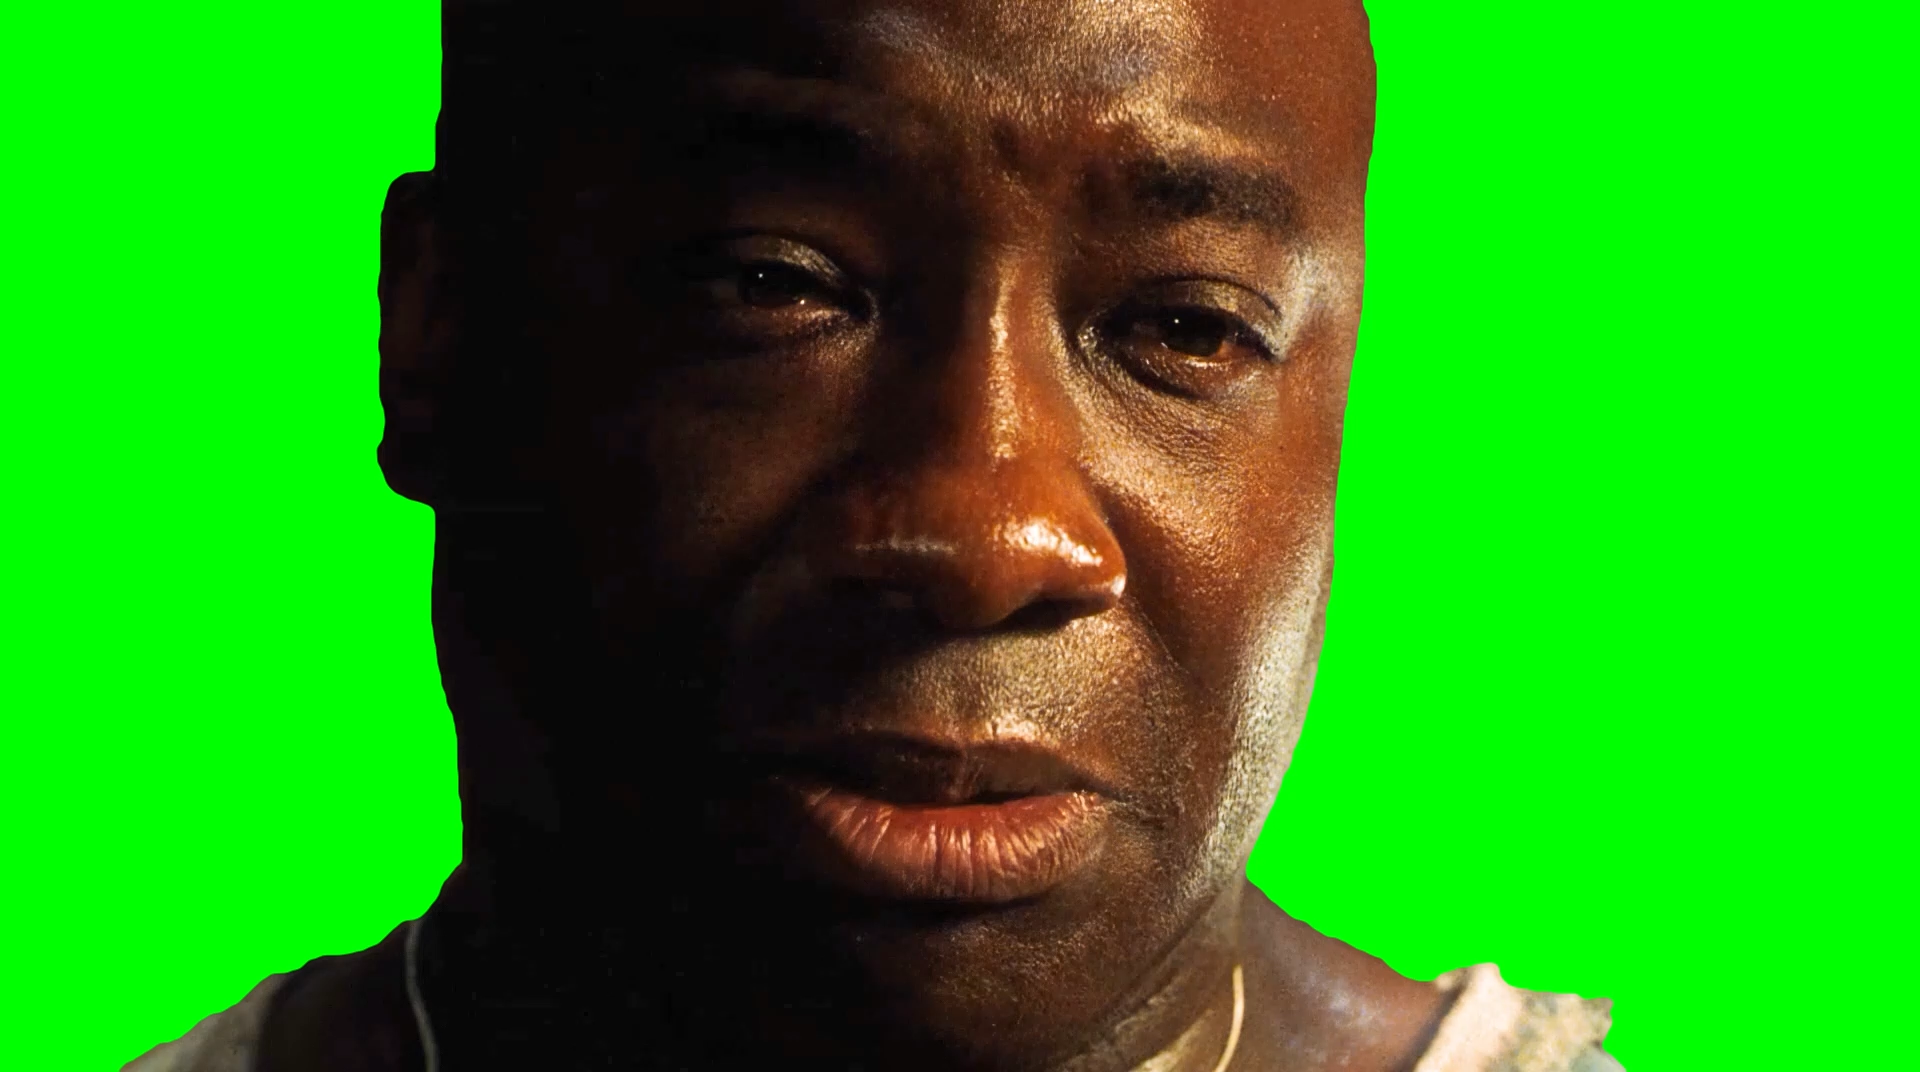 I’m tired boss - The Green Mile (Green Screen)